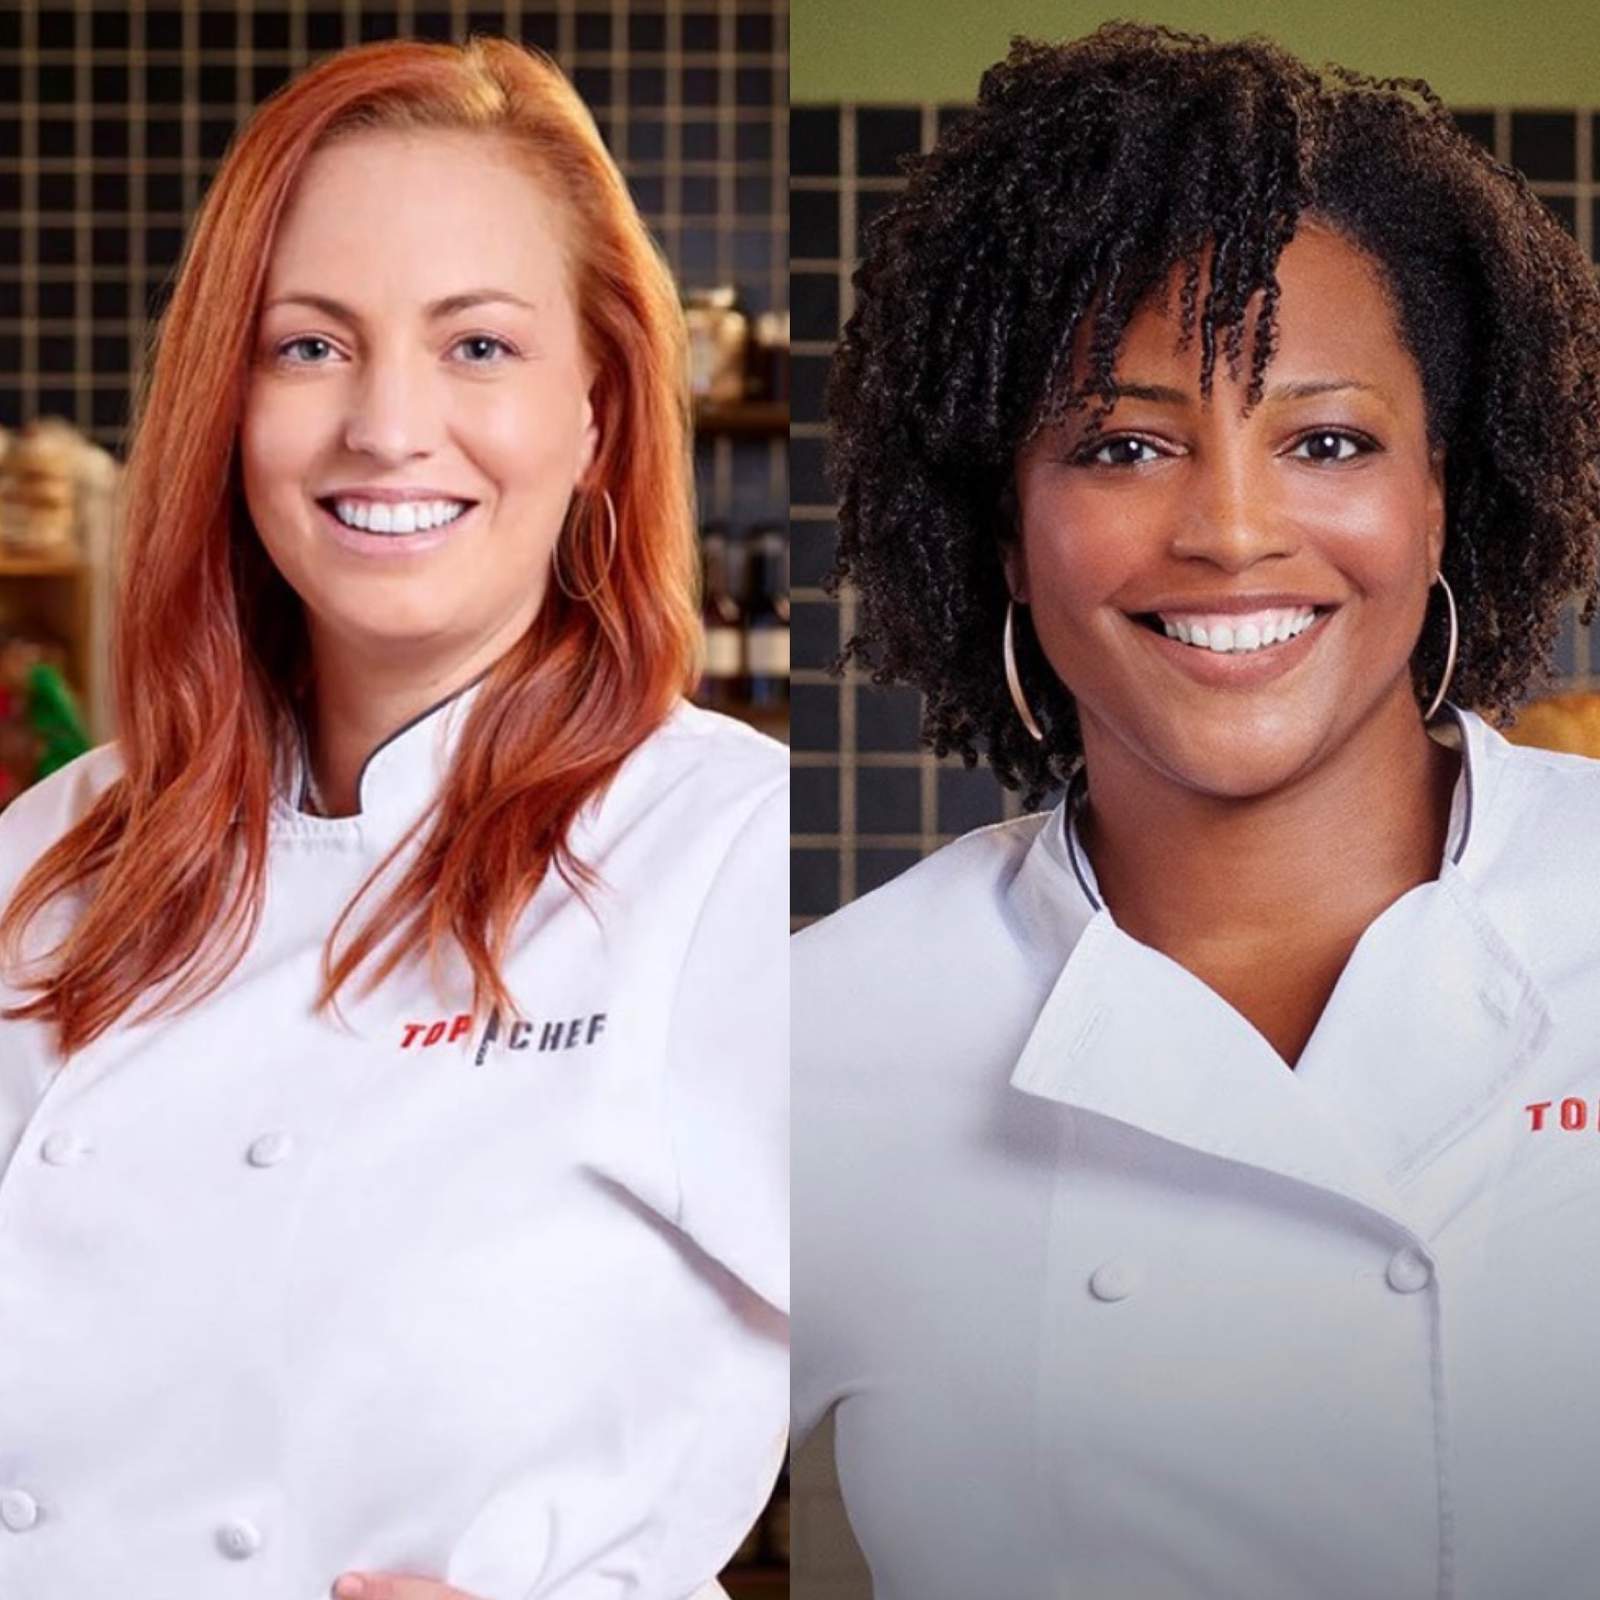 Two Houston-area chefs will compete on the newest season of Bravo’s ‘Top Chef’